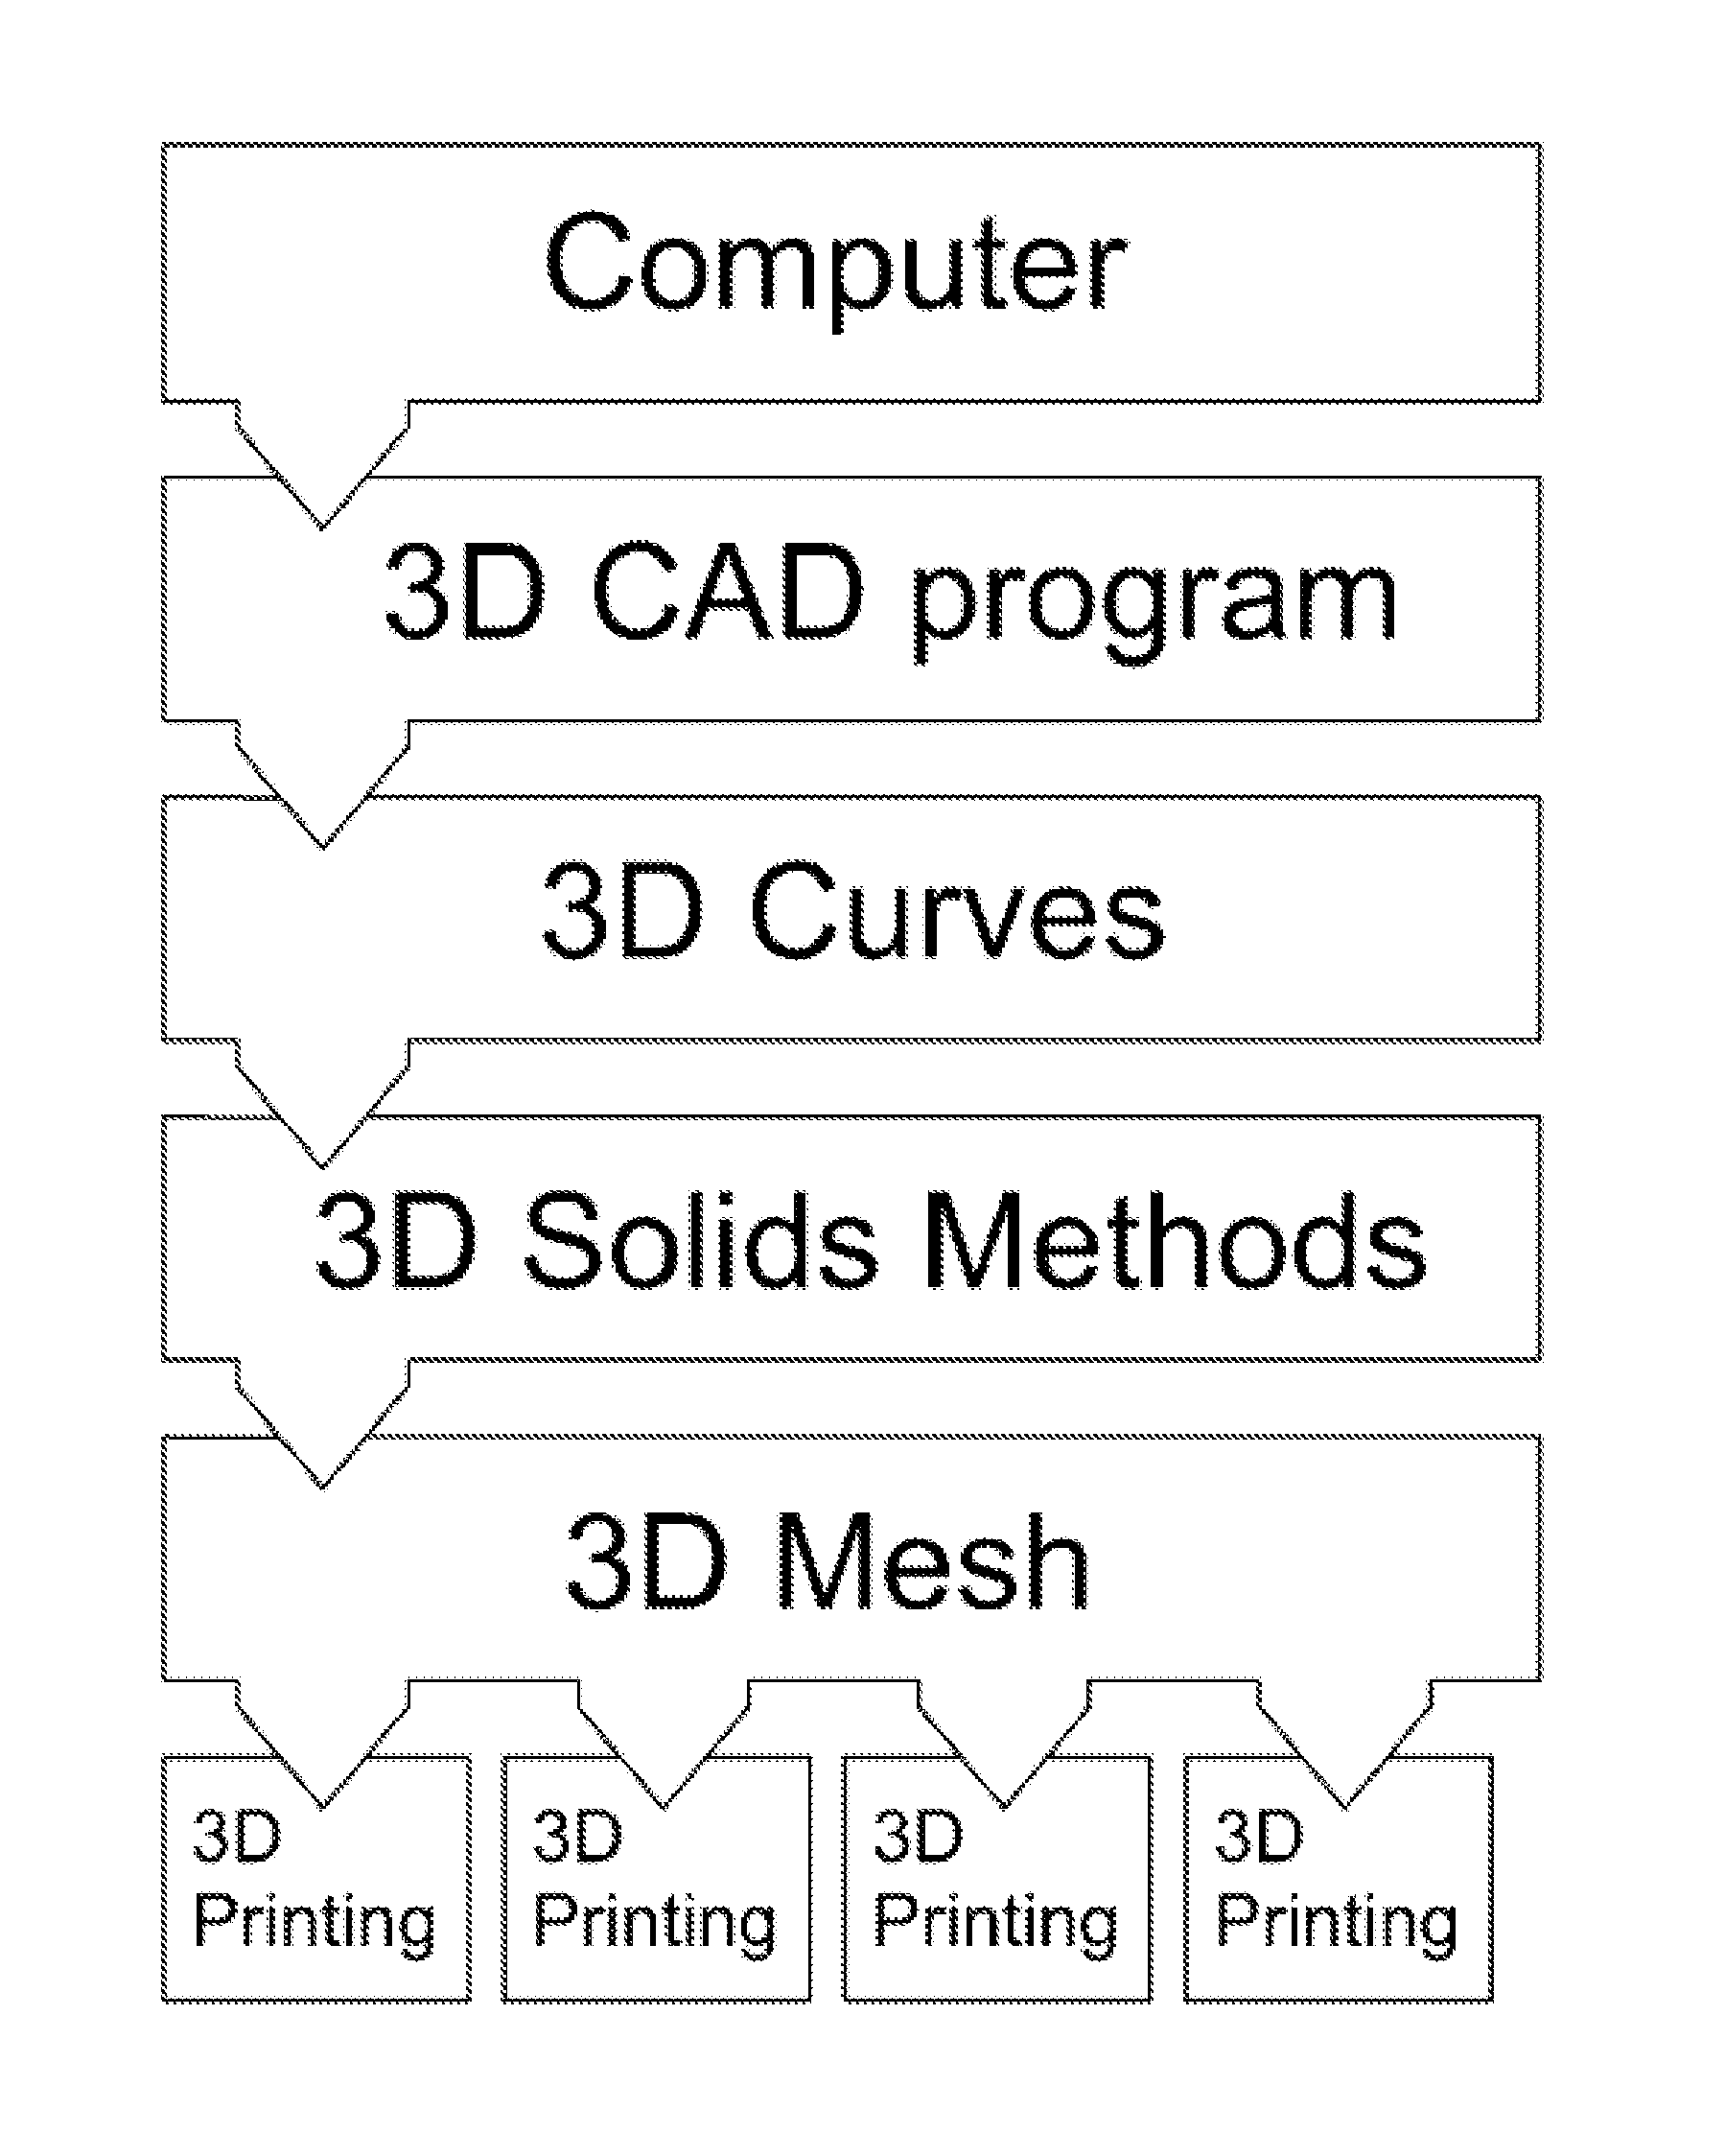 Computer-Implemented Methods for Generating 3D Models Suitable for 3D Printing